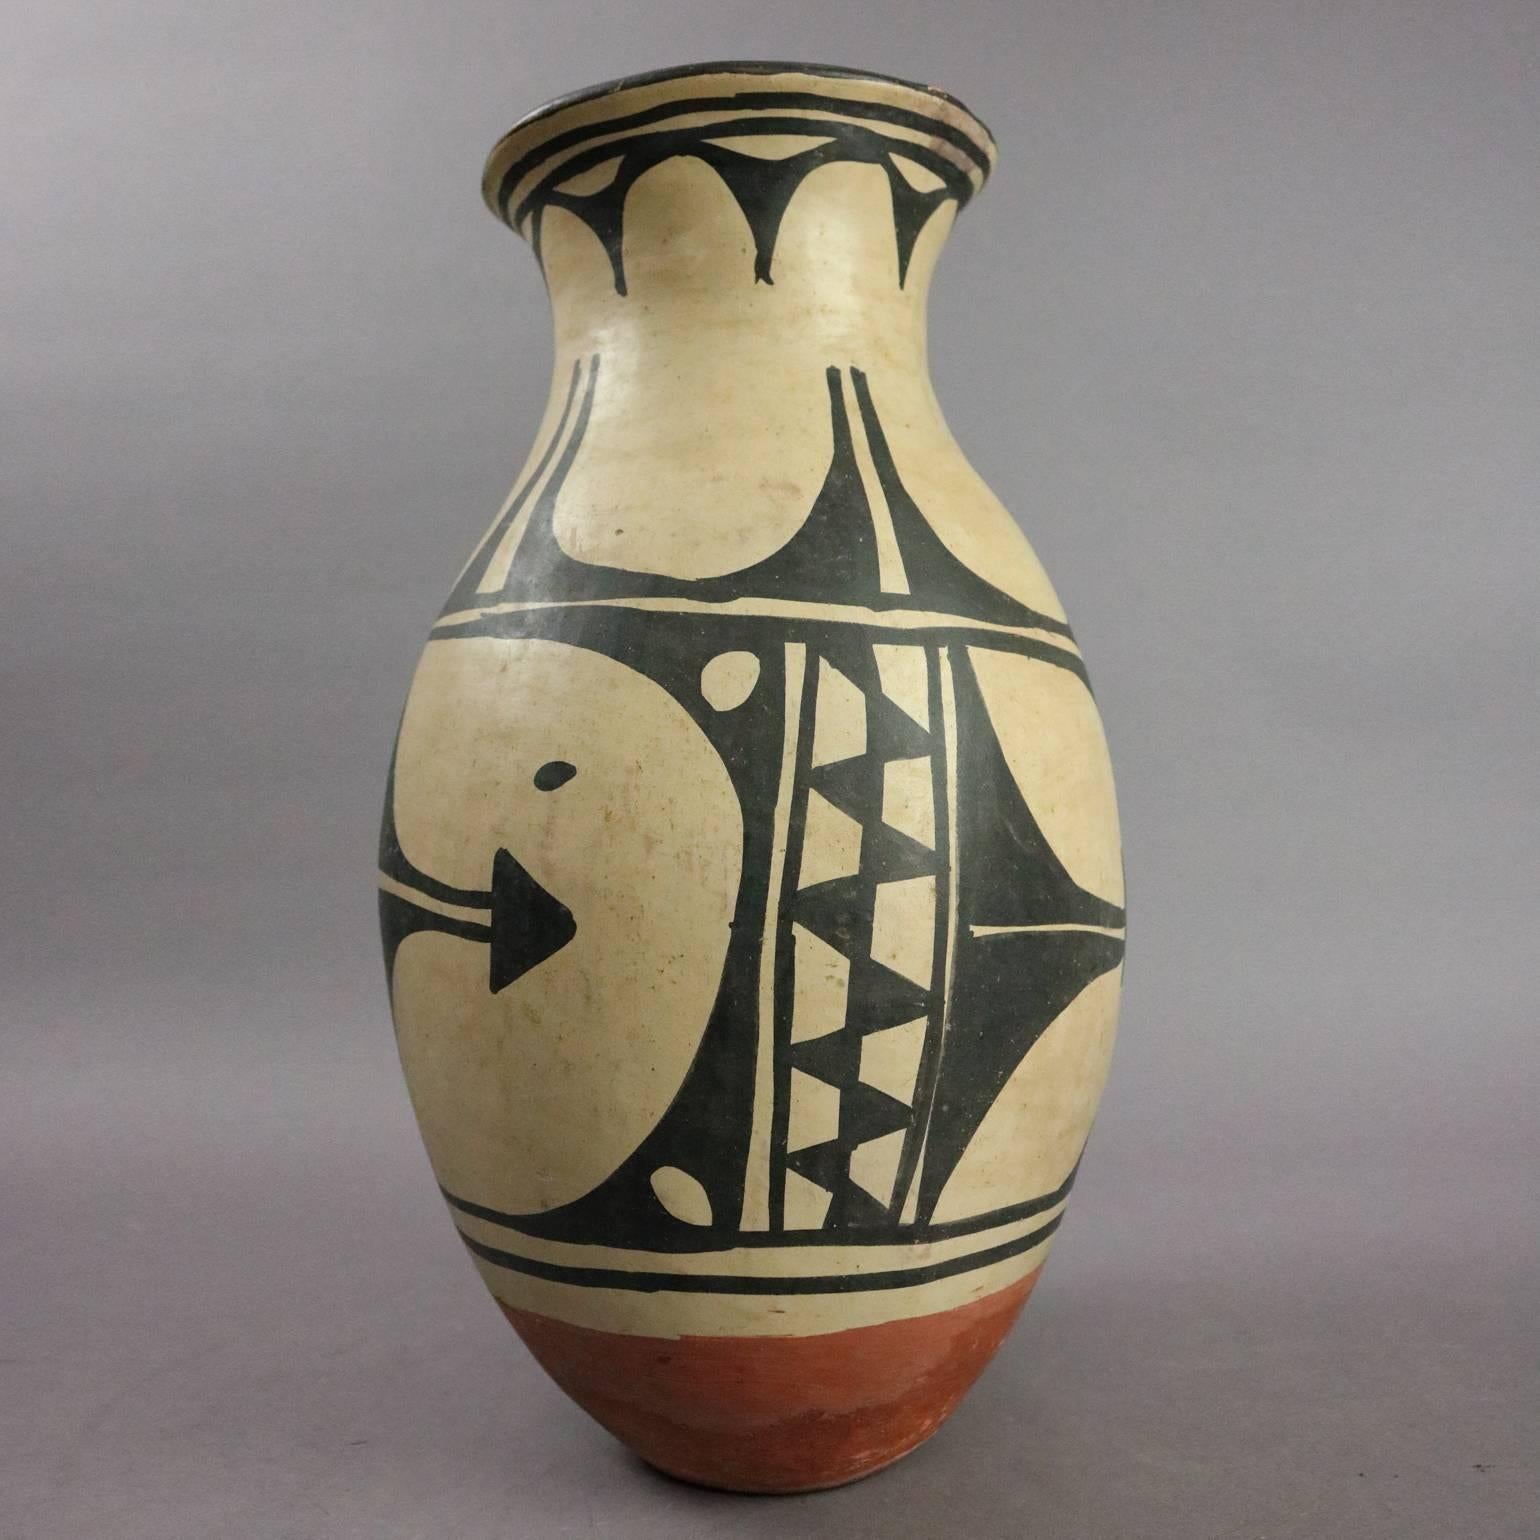 20th Century Antique Native American Indian Acoma Decorated Clay Pottery Jar/Vase, circa 1900